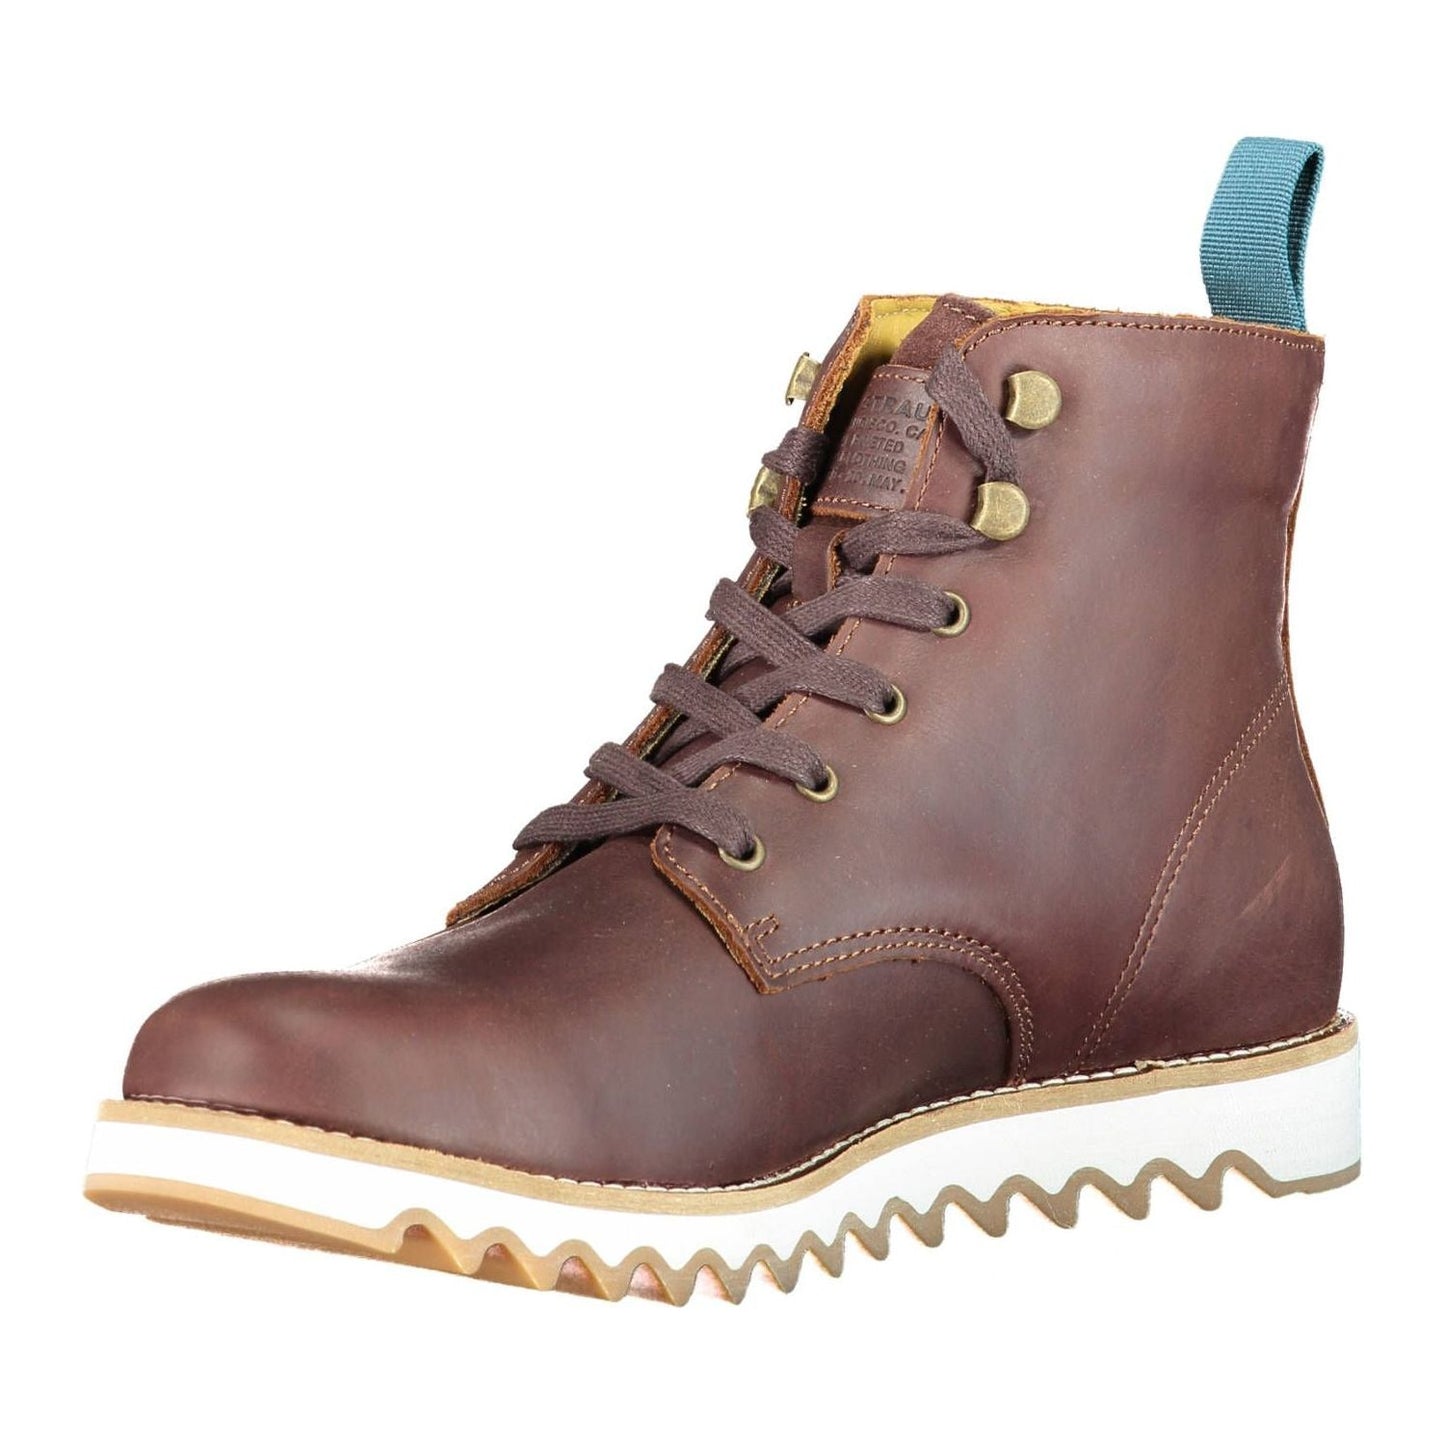 Levi's | Elevated Brown Ankle Lace-Up Boots with Contrasting Sole| McRichard Designer Brands   